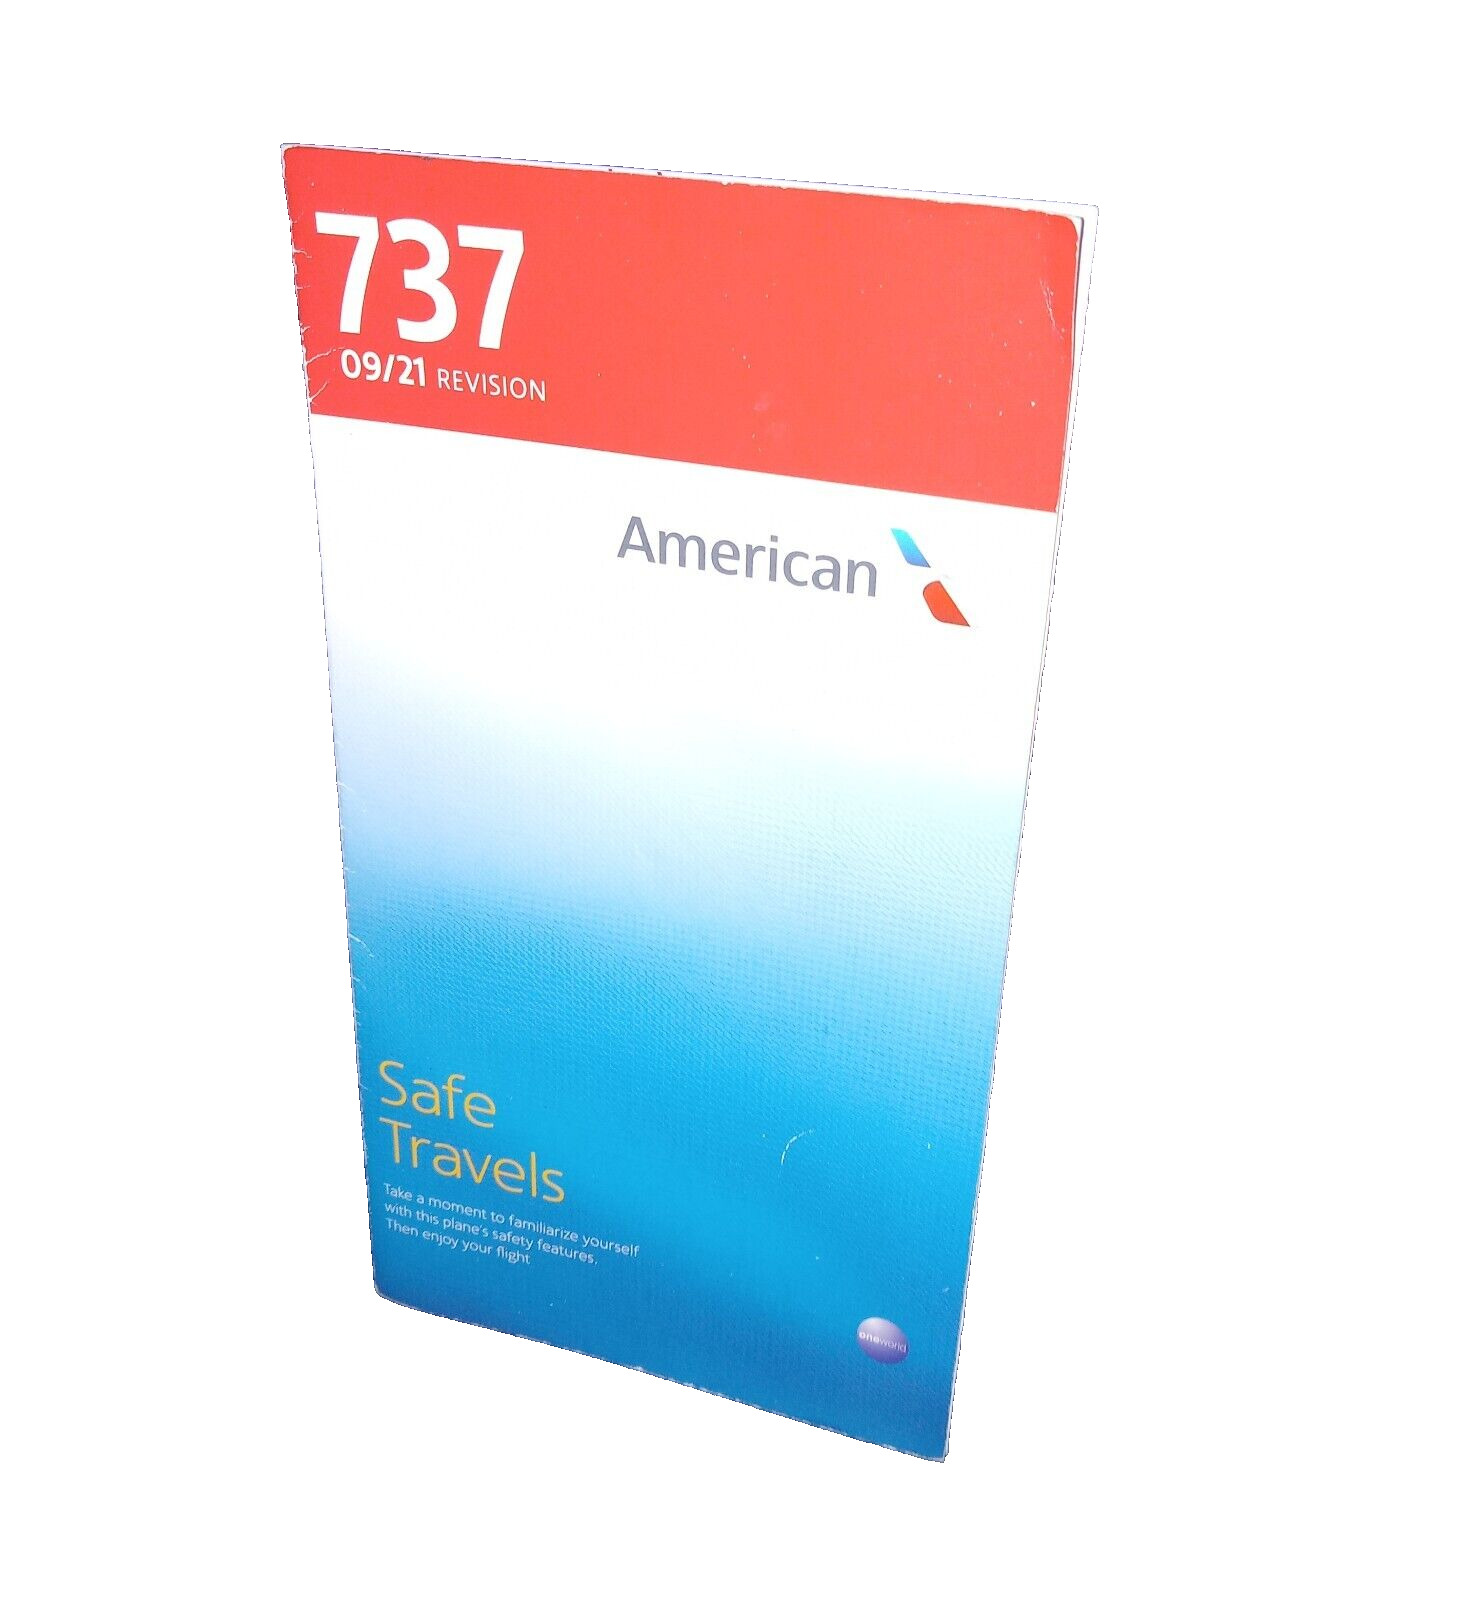 American Airlines 737-800 Safety Card 09/21 Revision Boeing 